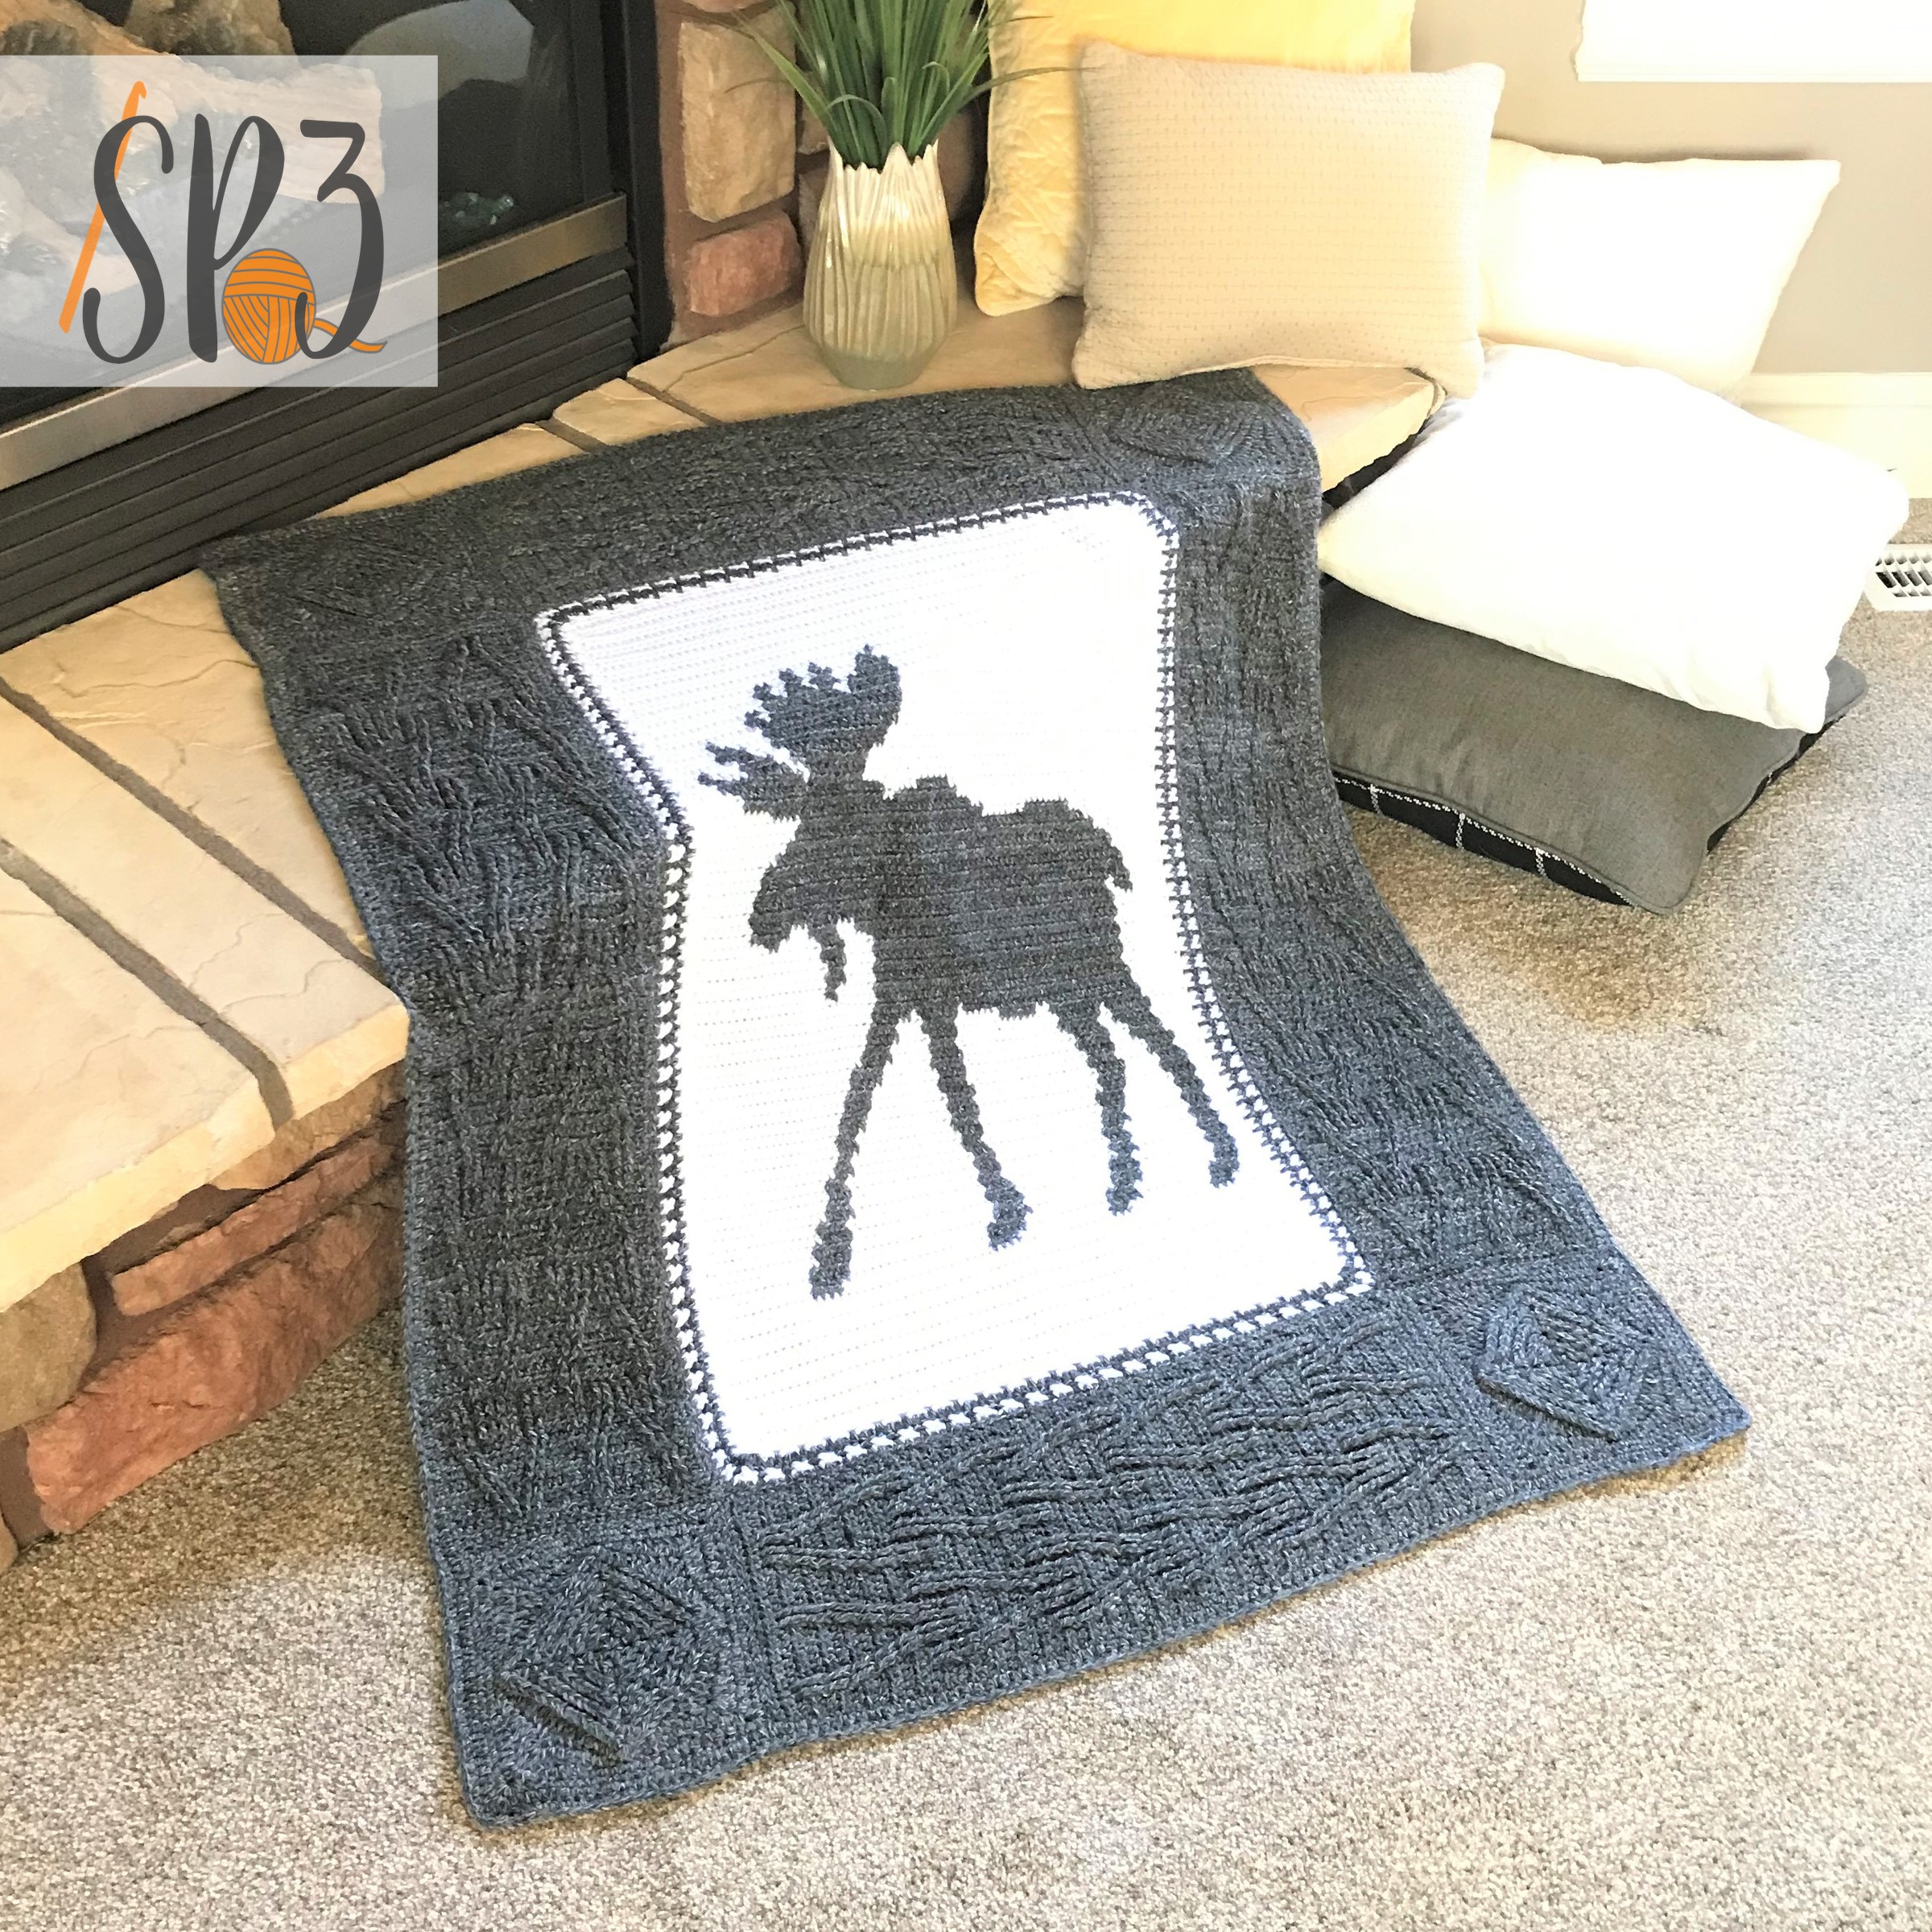 You are currently viewing Wandering Moose Blanket – Crochet Pattern